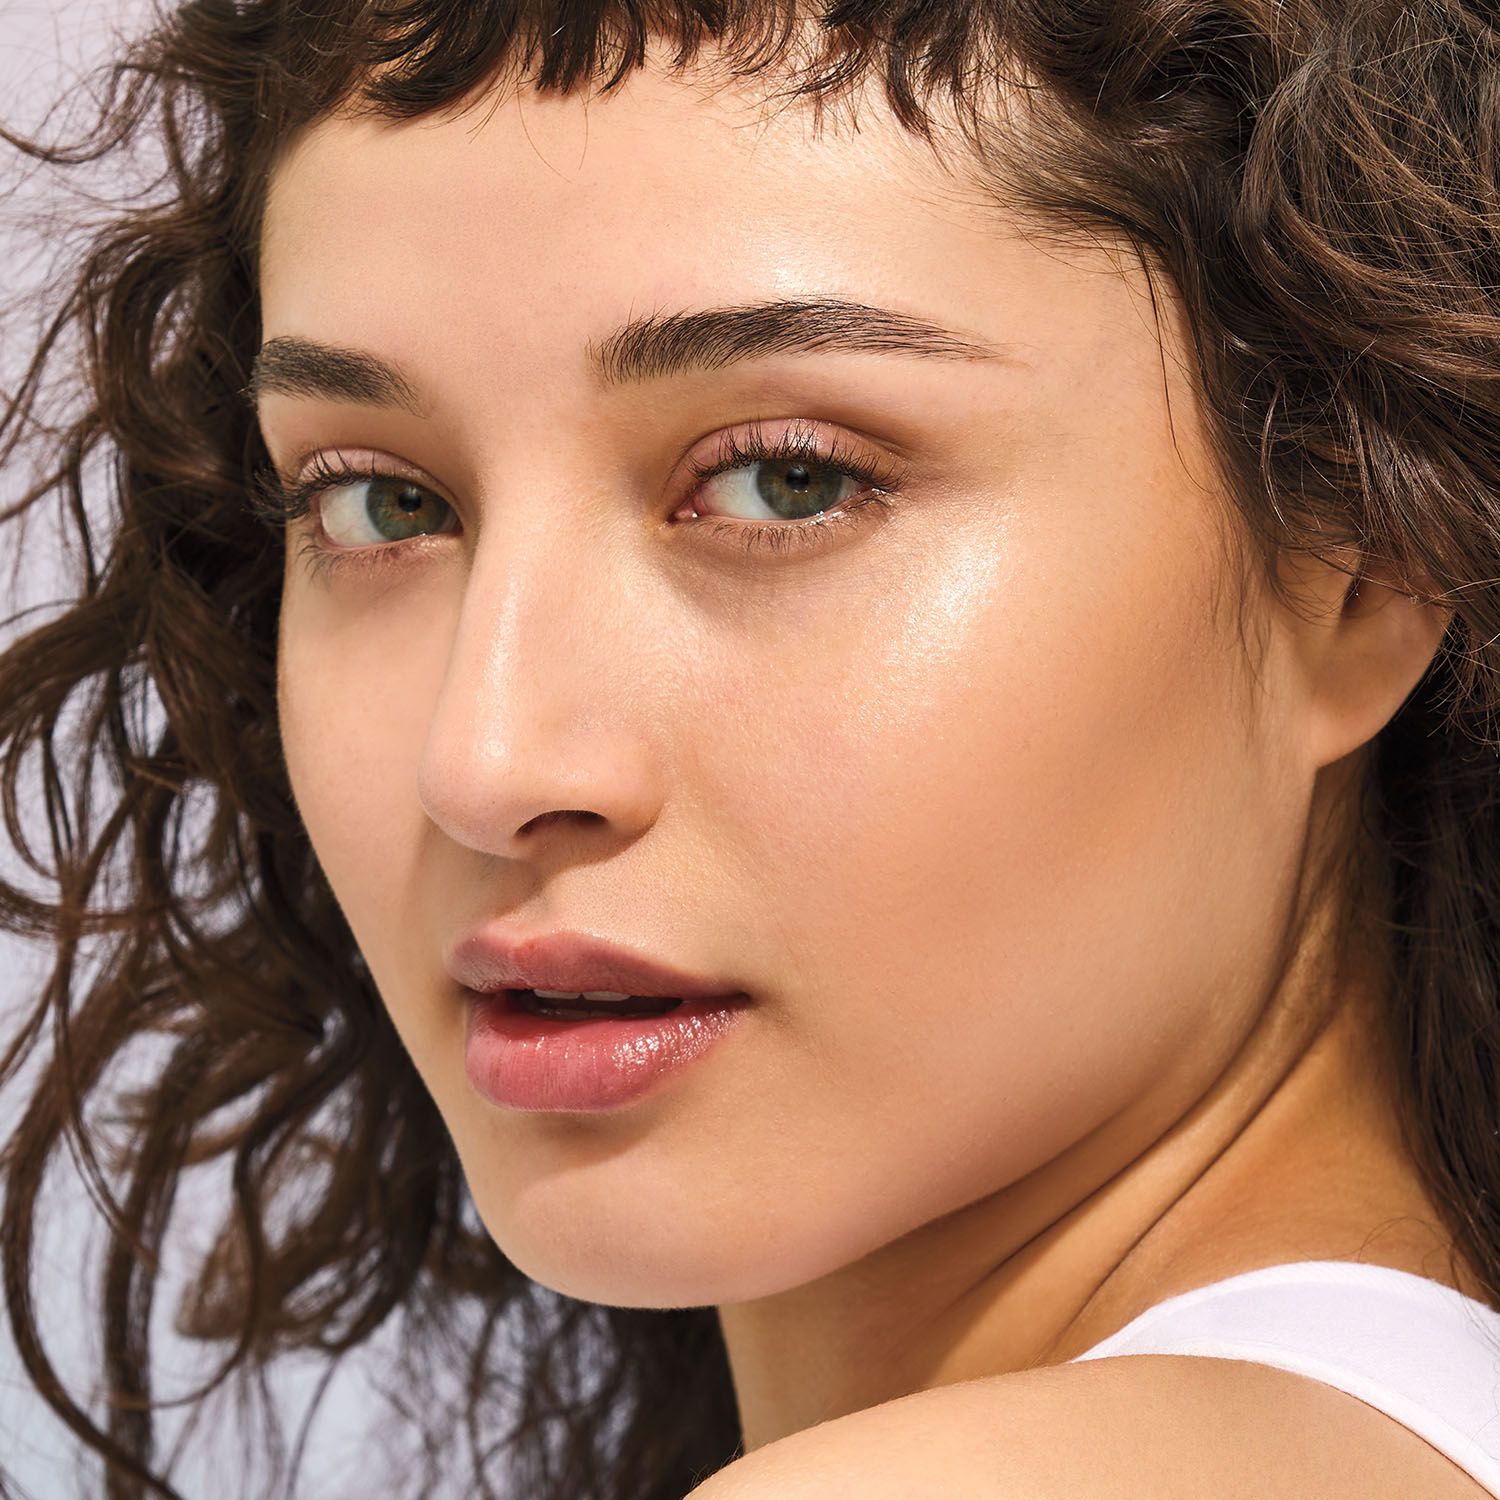 The New Year’s Hottest Beauty Trend